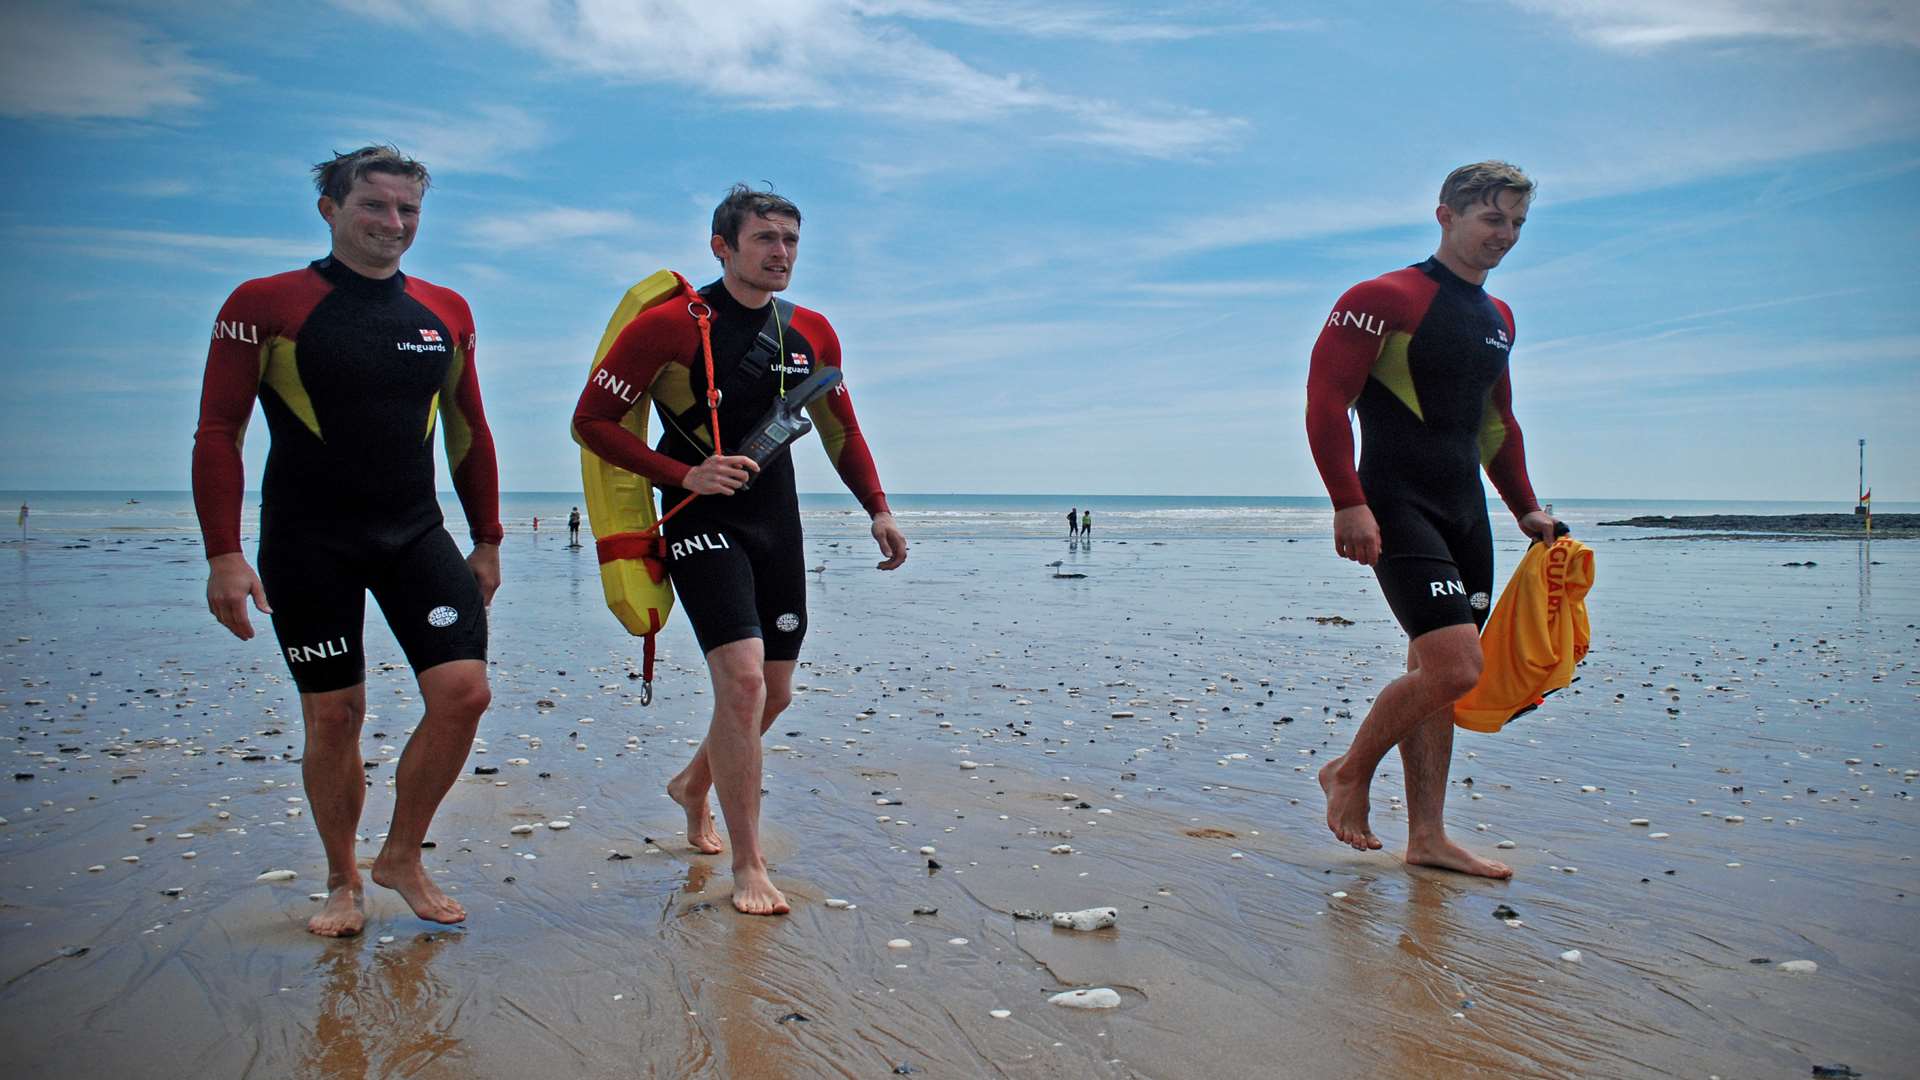 RNLI lifeguards are employed at Broadstairs. Picture: RNLI